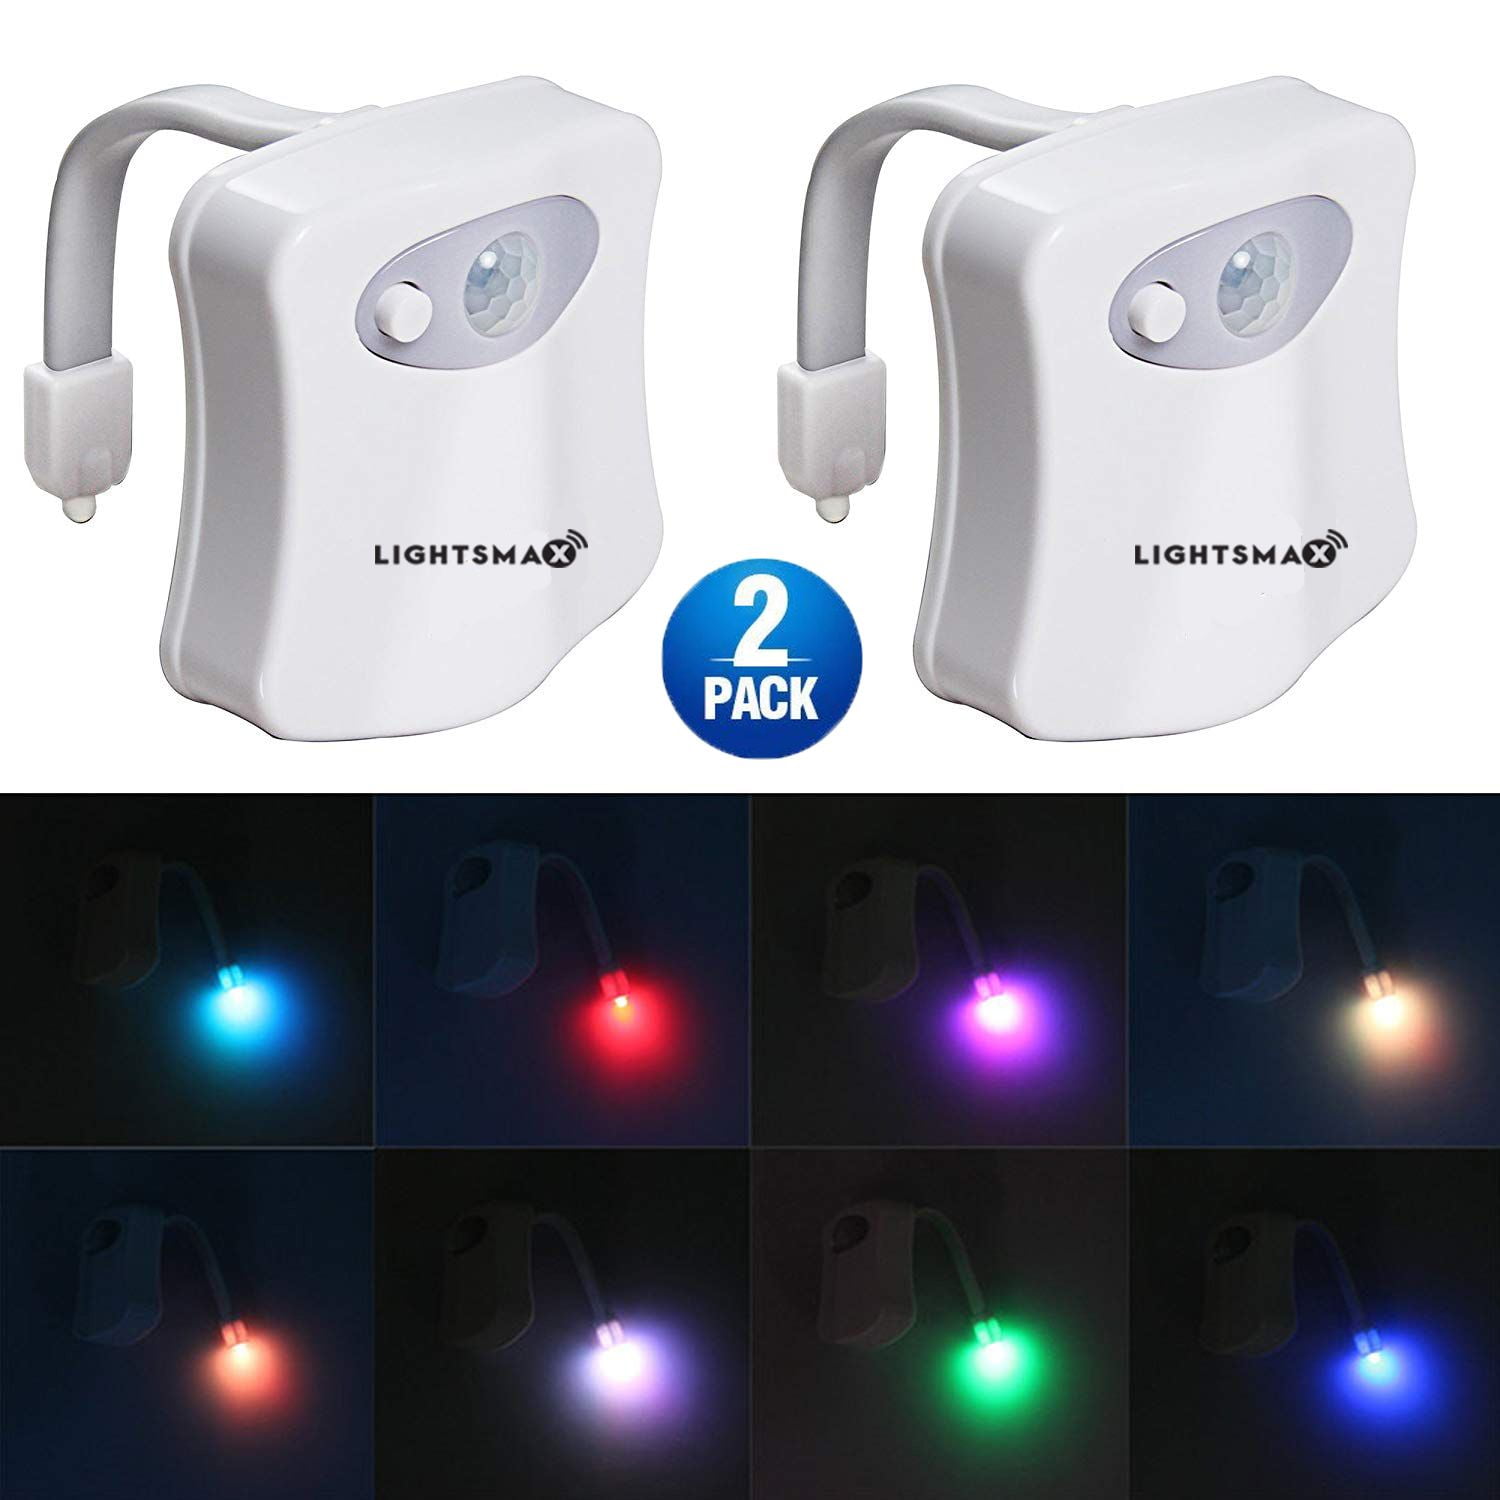 Glow Bowl Toilet Light, 2PACK Toilet Night Light Motion Activated 8 Co -  Uhomepro